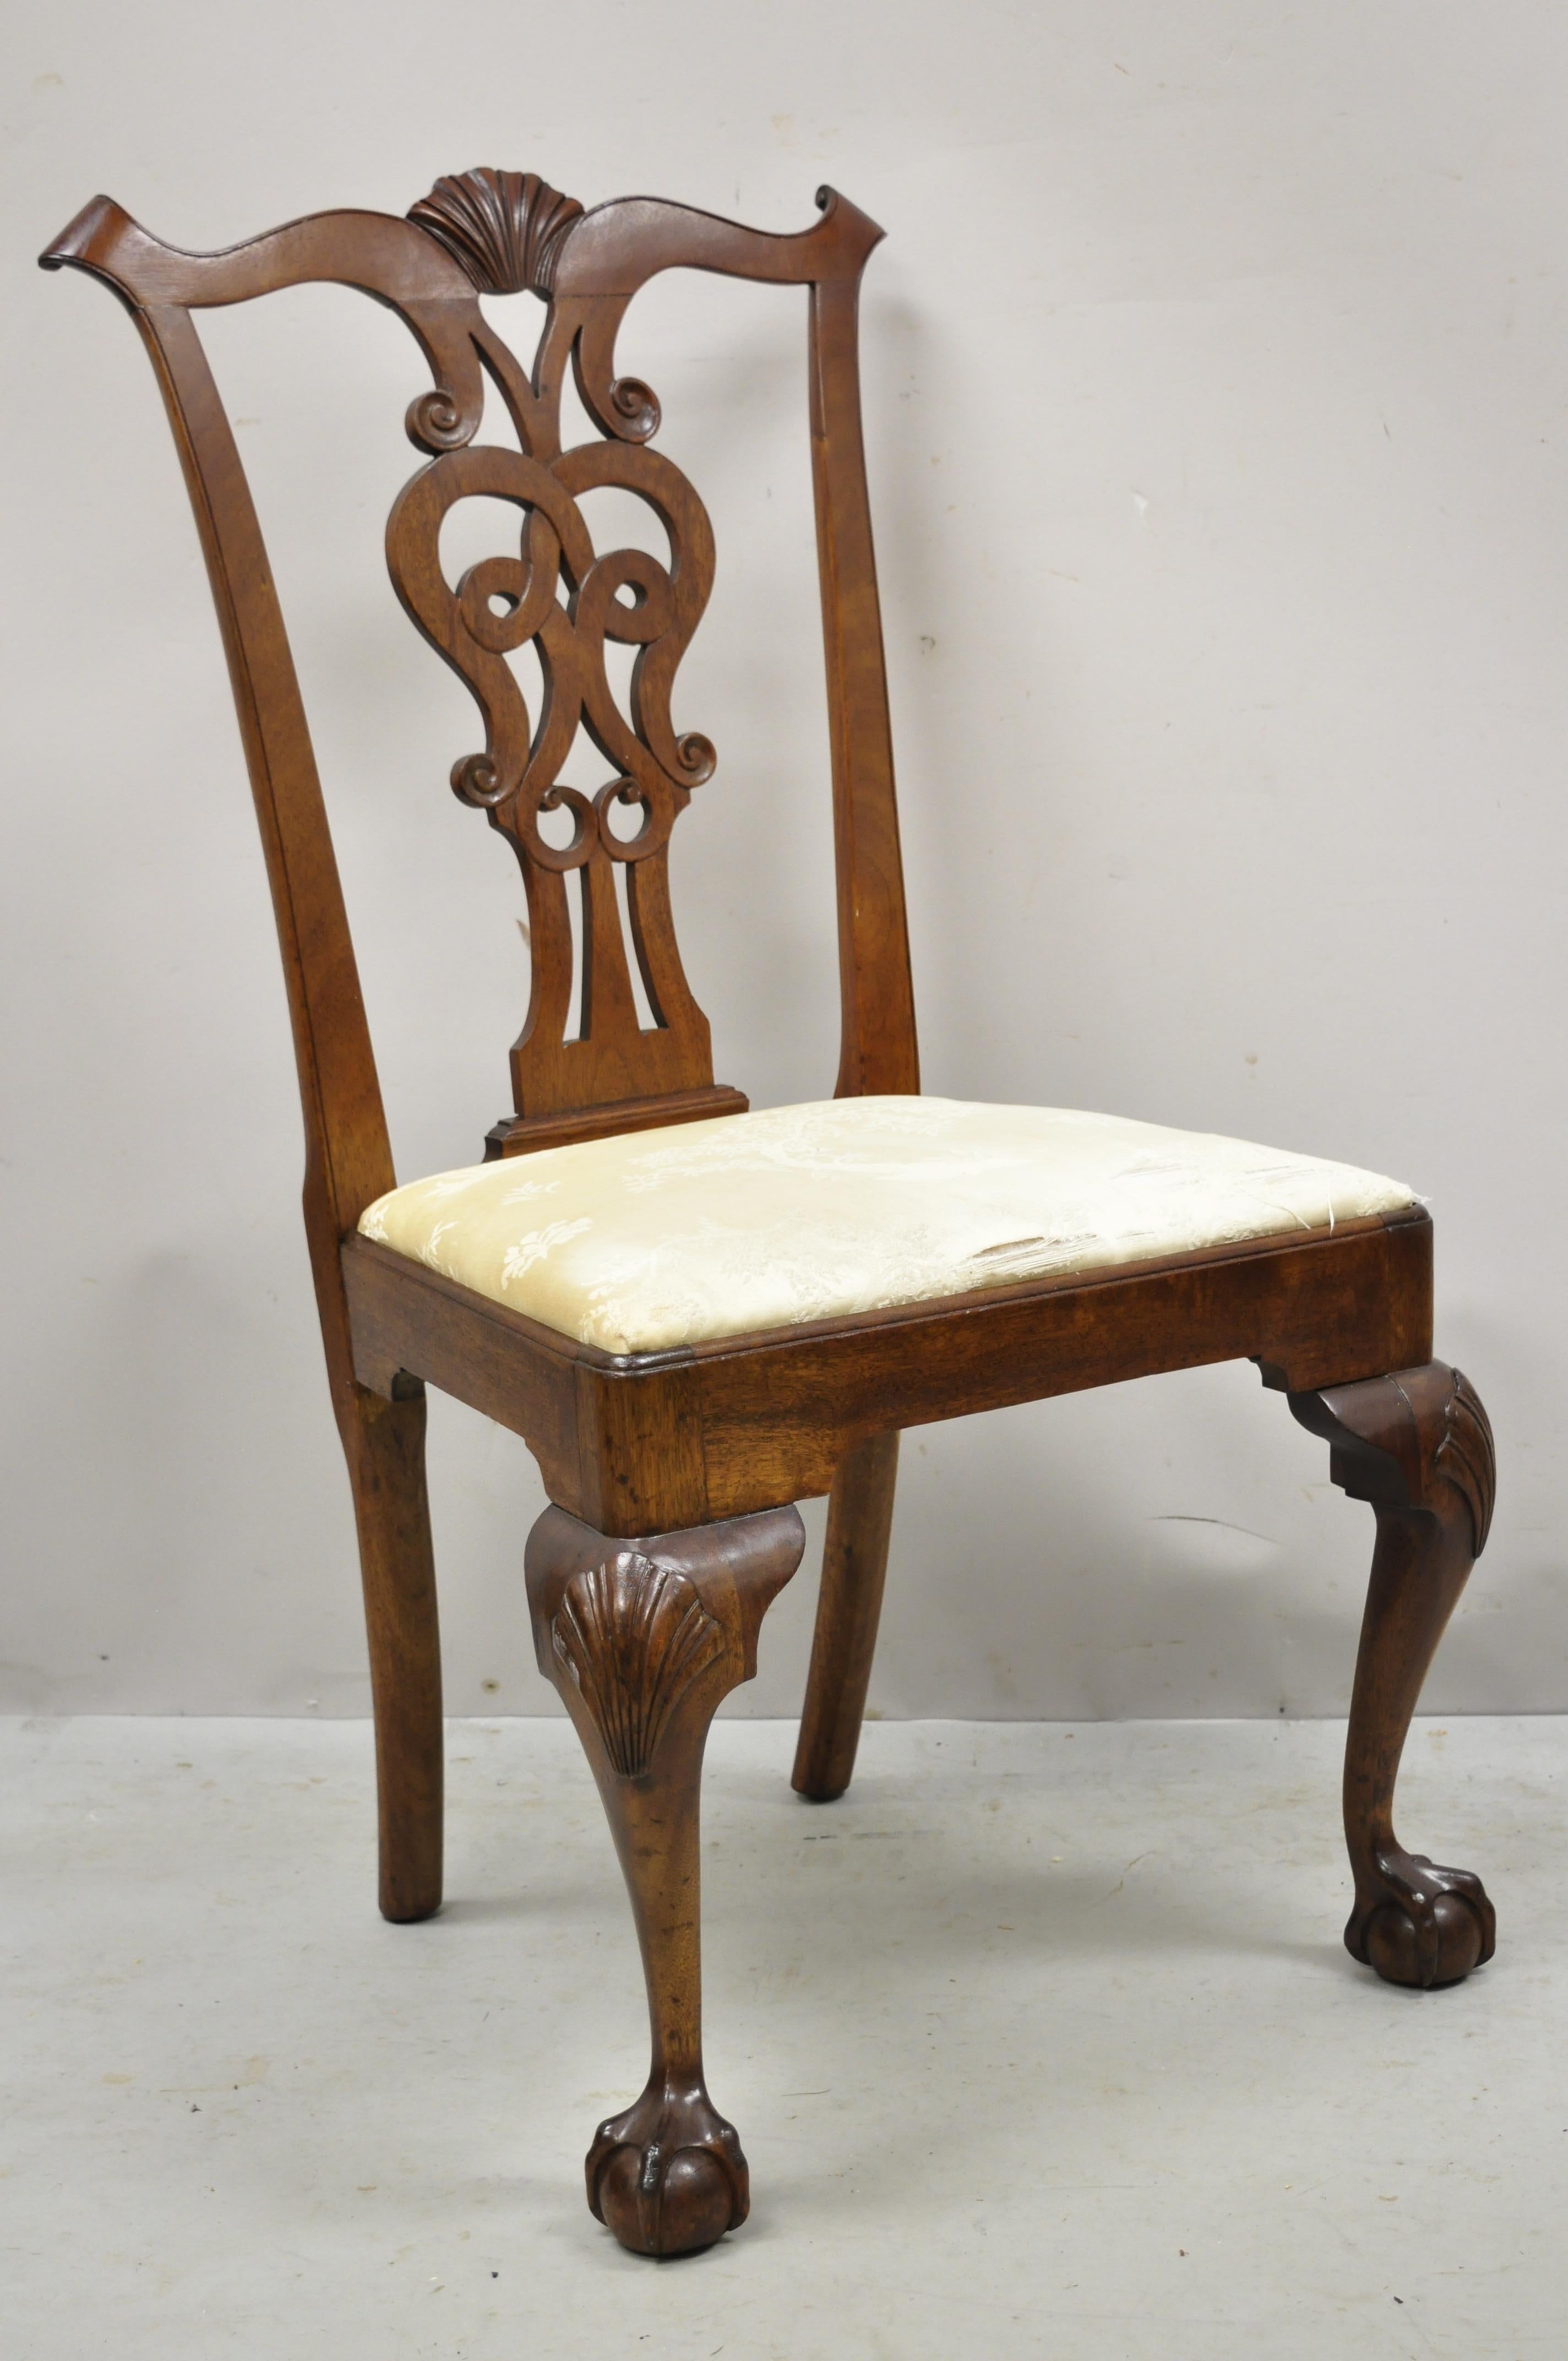 Antique English Chippendale mahogany carved ball and claw shell carved dining side chair. Item features shell carved knees, solid wood construction, beautiful wood grain, nicely carved details, carved ball and claw feet. Circa early 1900s.